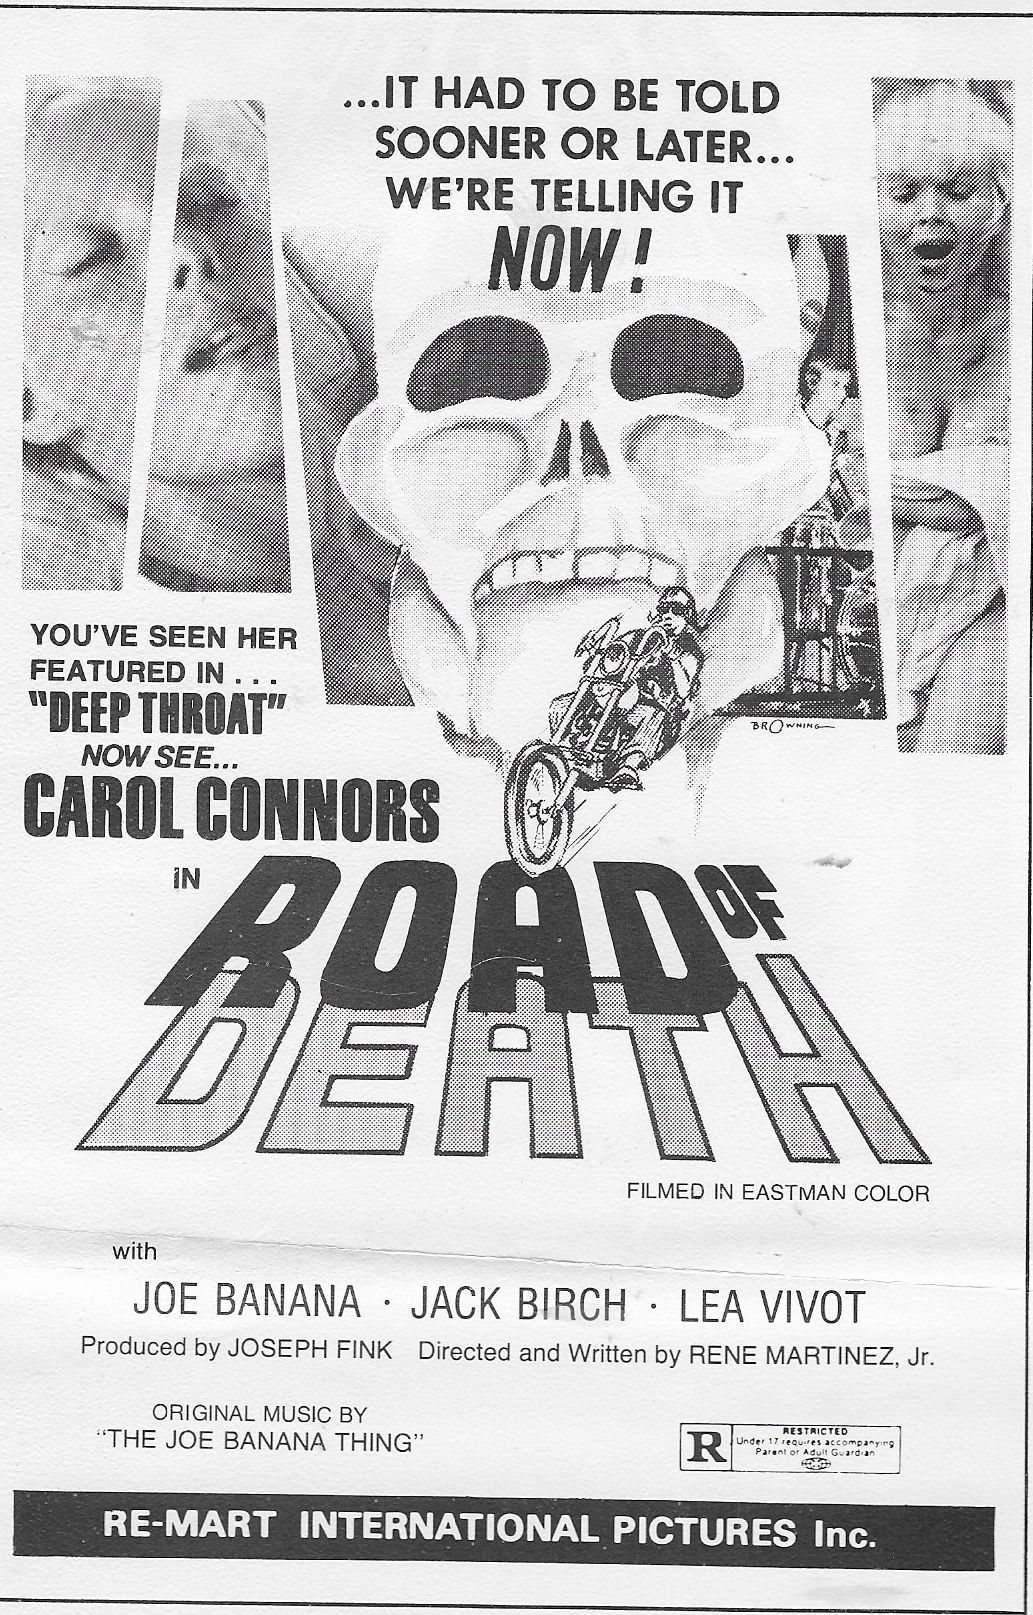 Road of Death (1973)